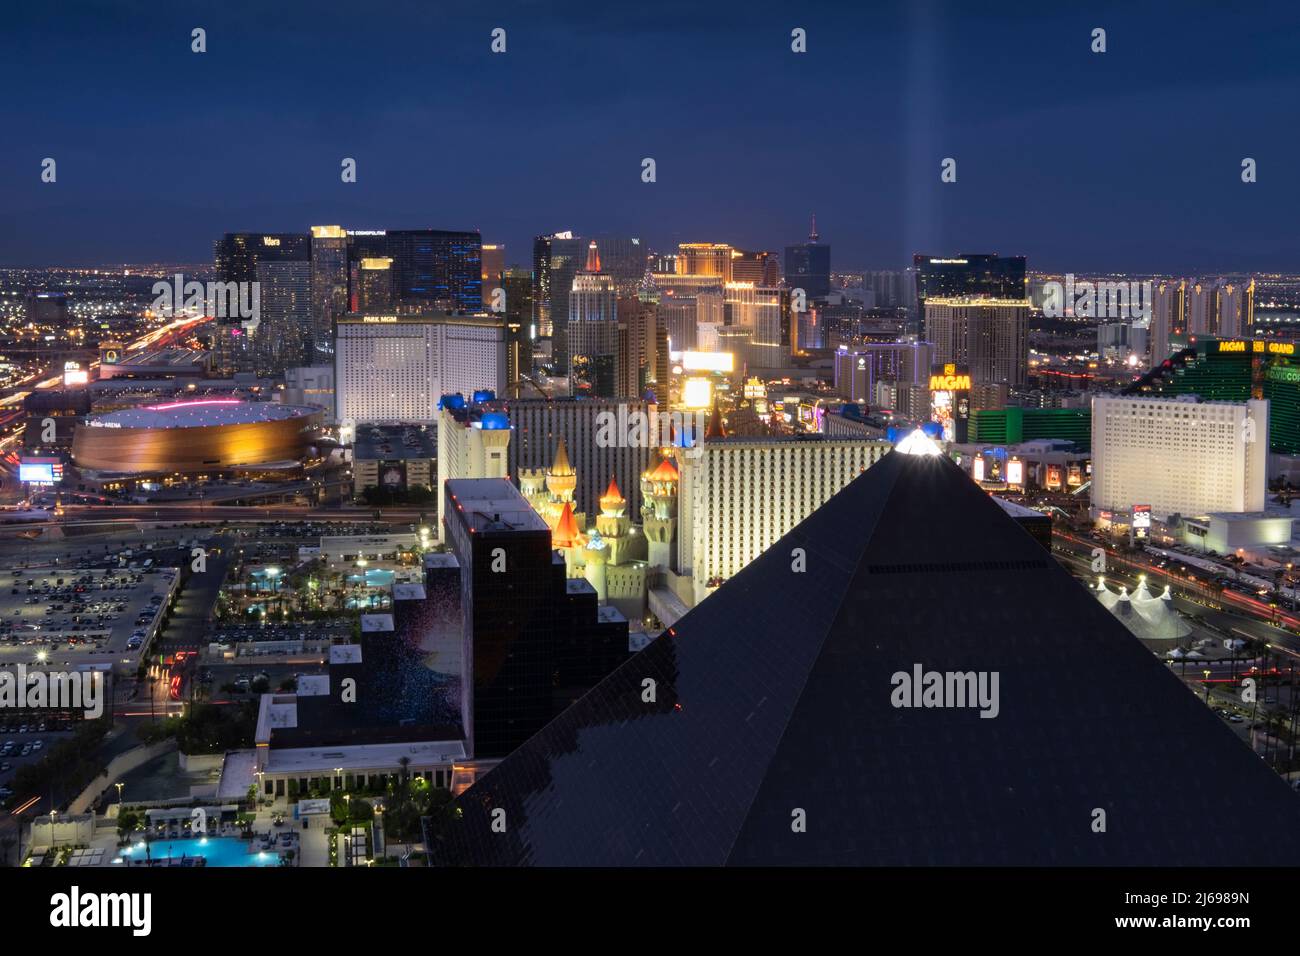 Elevated view of the Luxor Hotel and Casino and Las Vegas Strip area at night, Las Vegas, Nevada, United States of America Stock Photo